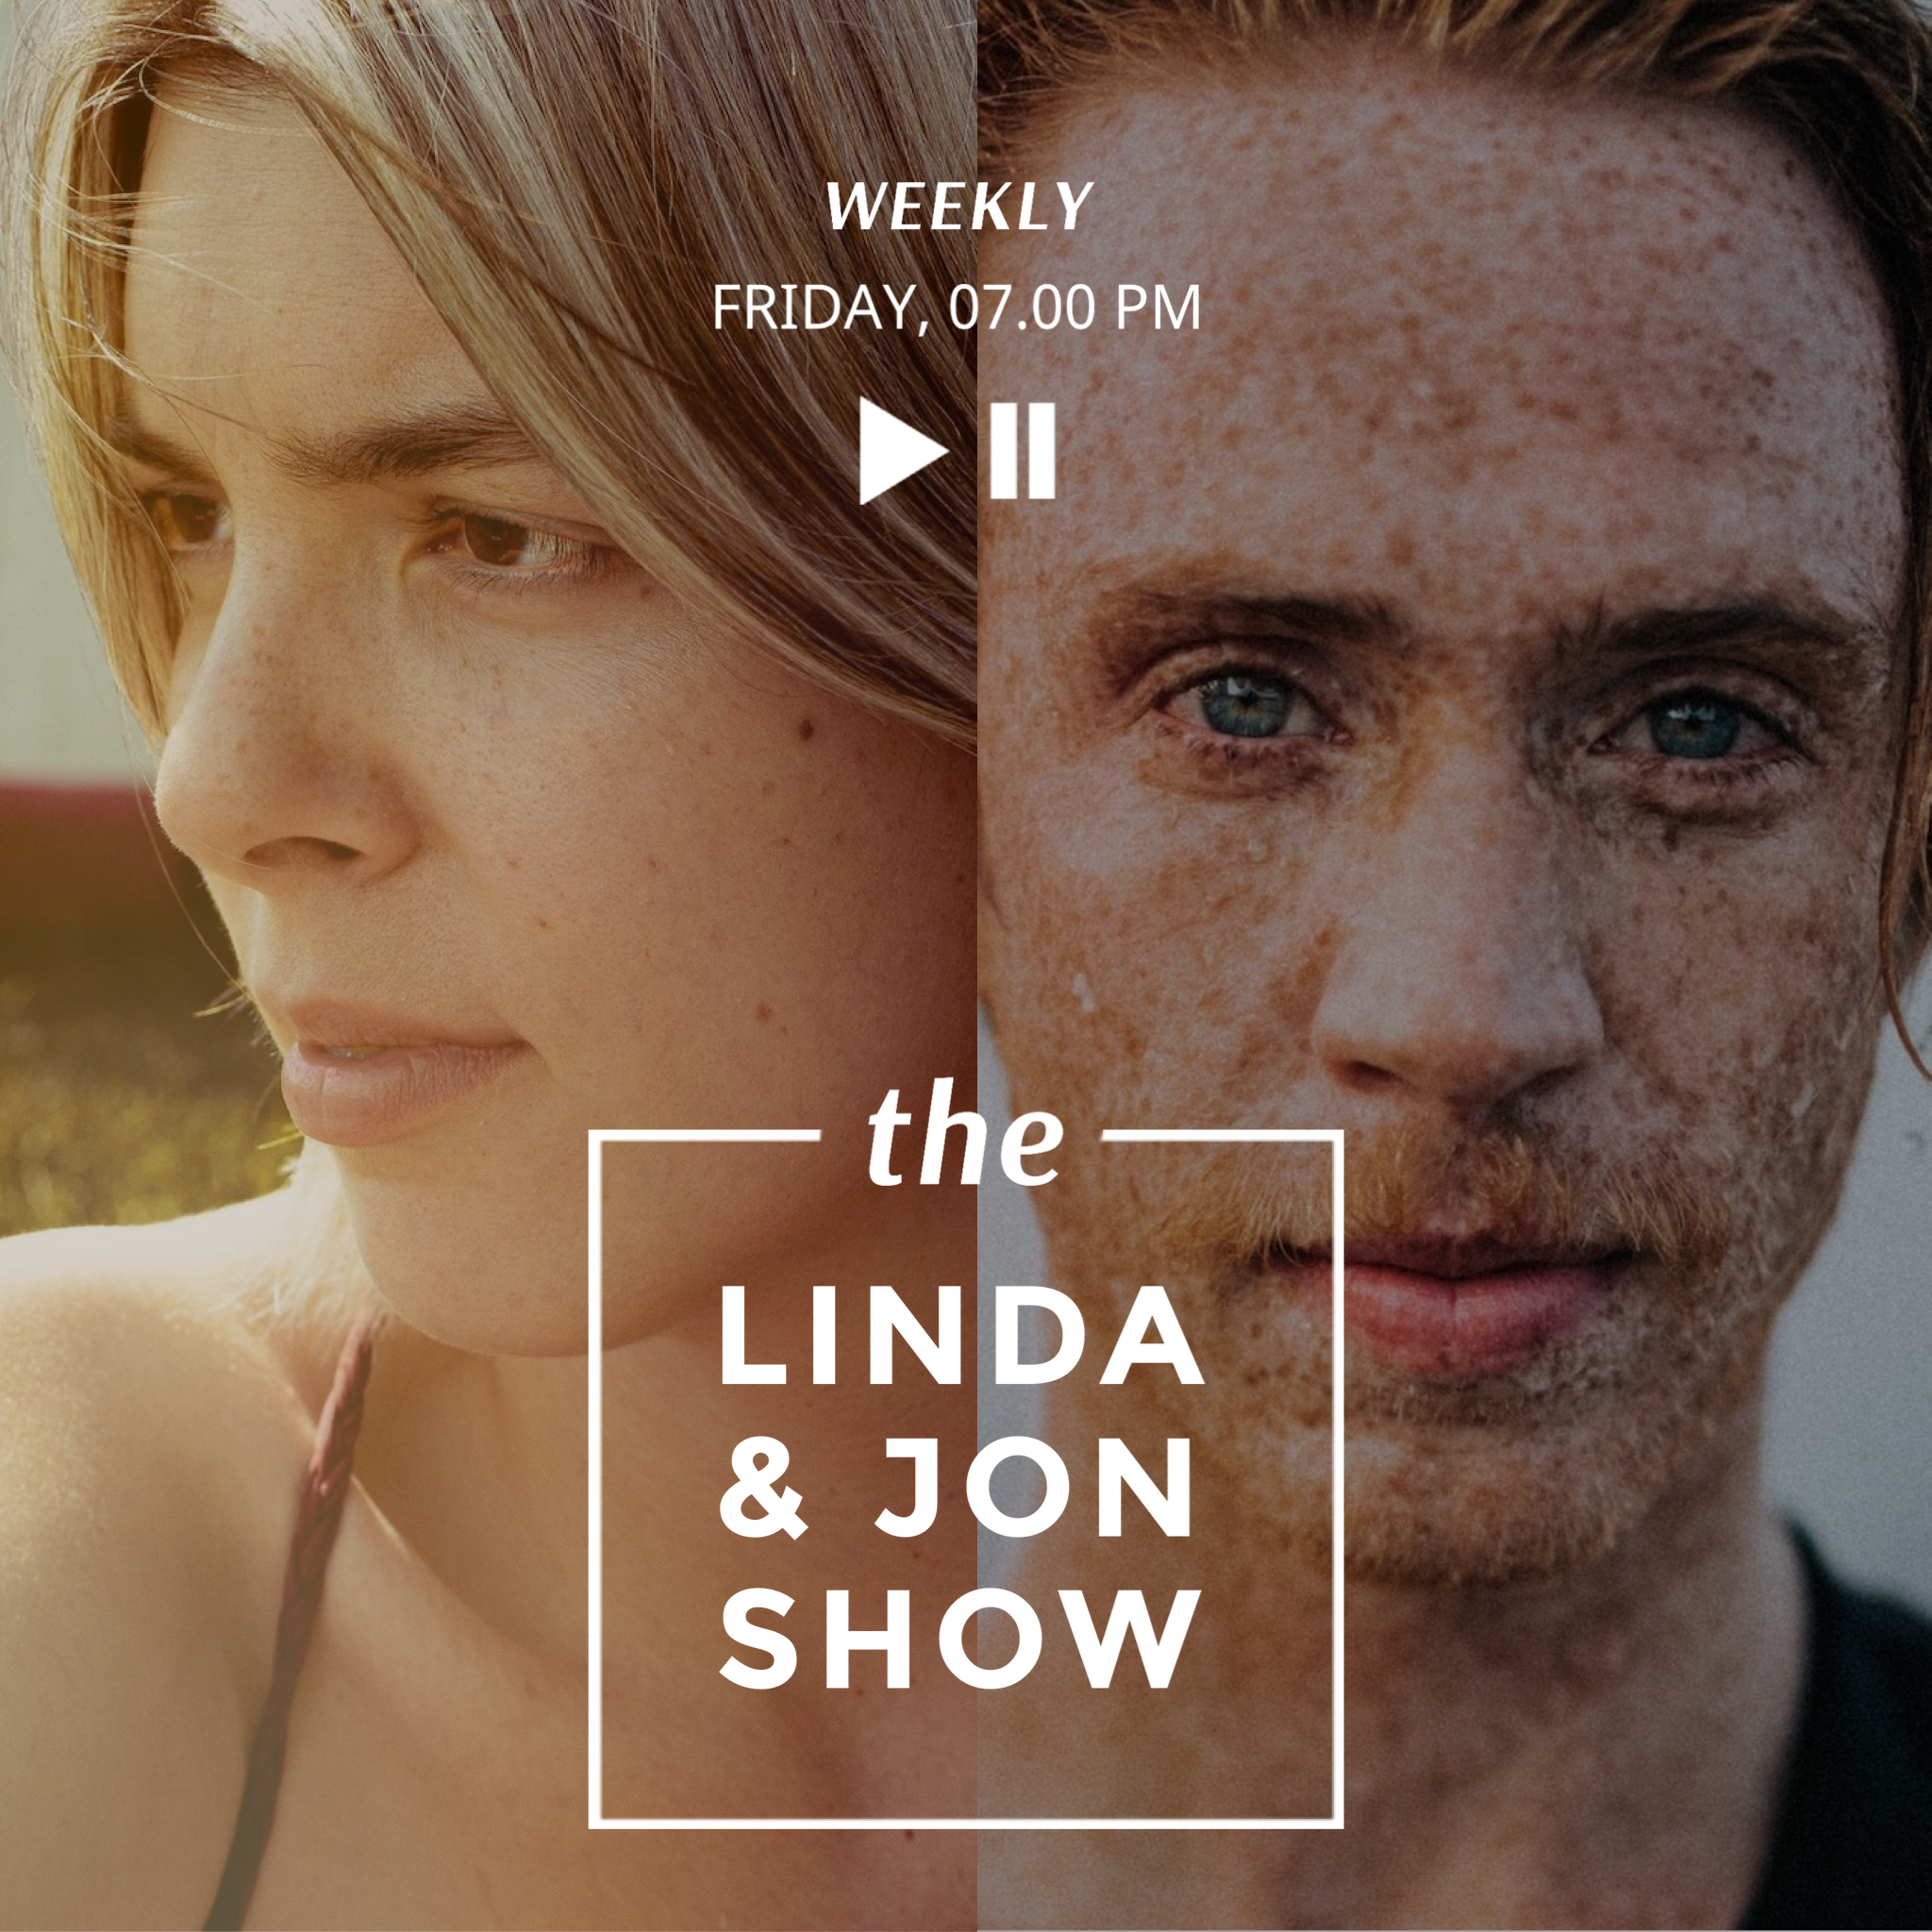 A Man And A Woman With Freckles On Their Faces Podcast Template